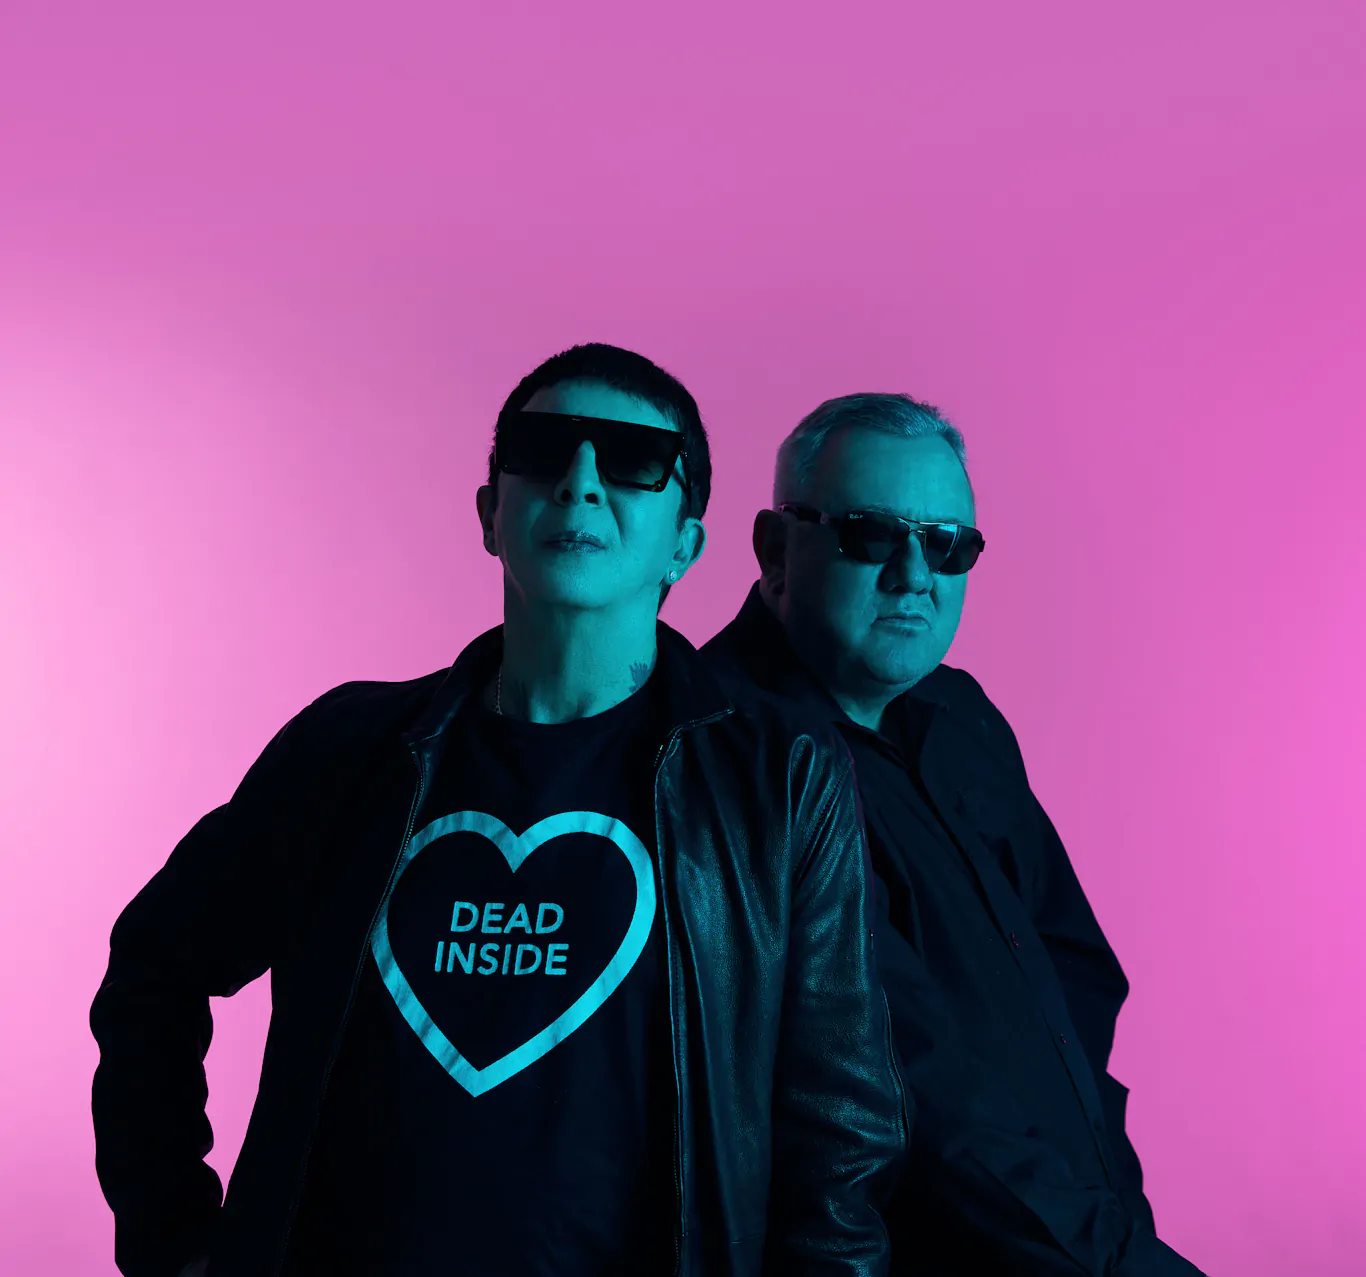 SOFT CELL plus special guests OMD and HEAVEN 17 announce a live open-air concert at St Anne’s Park on Saturday, 3rd June 2023